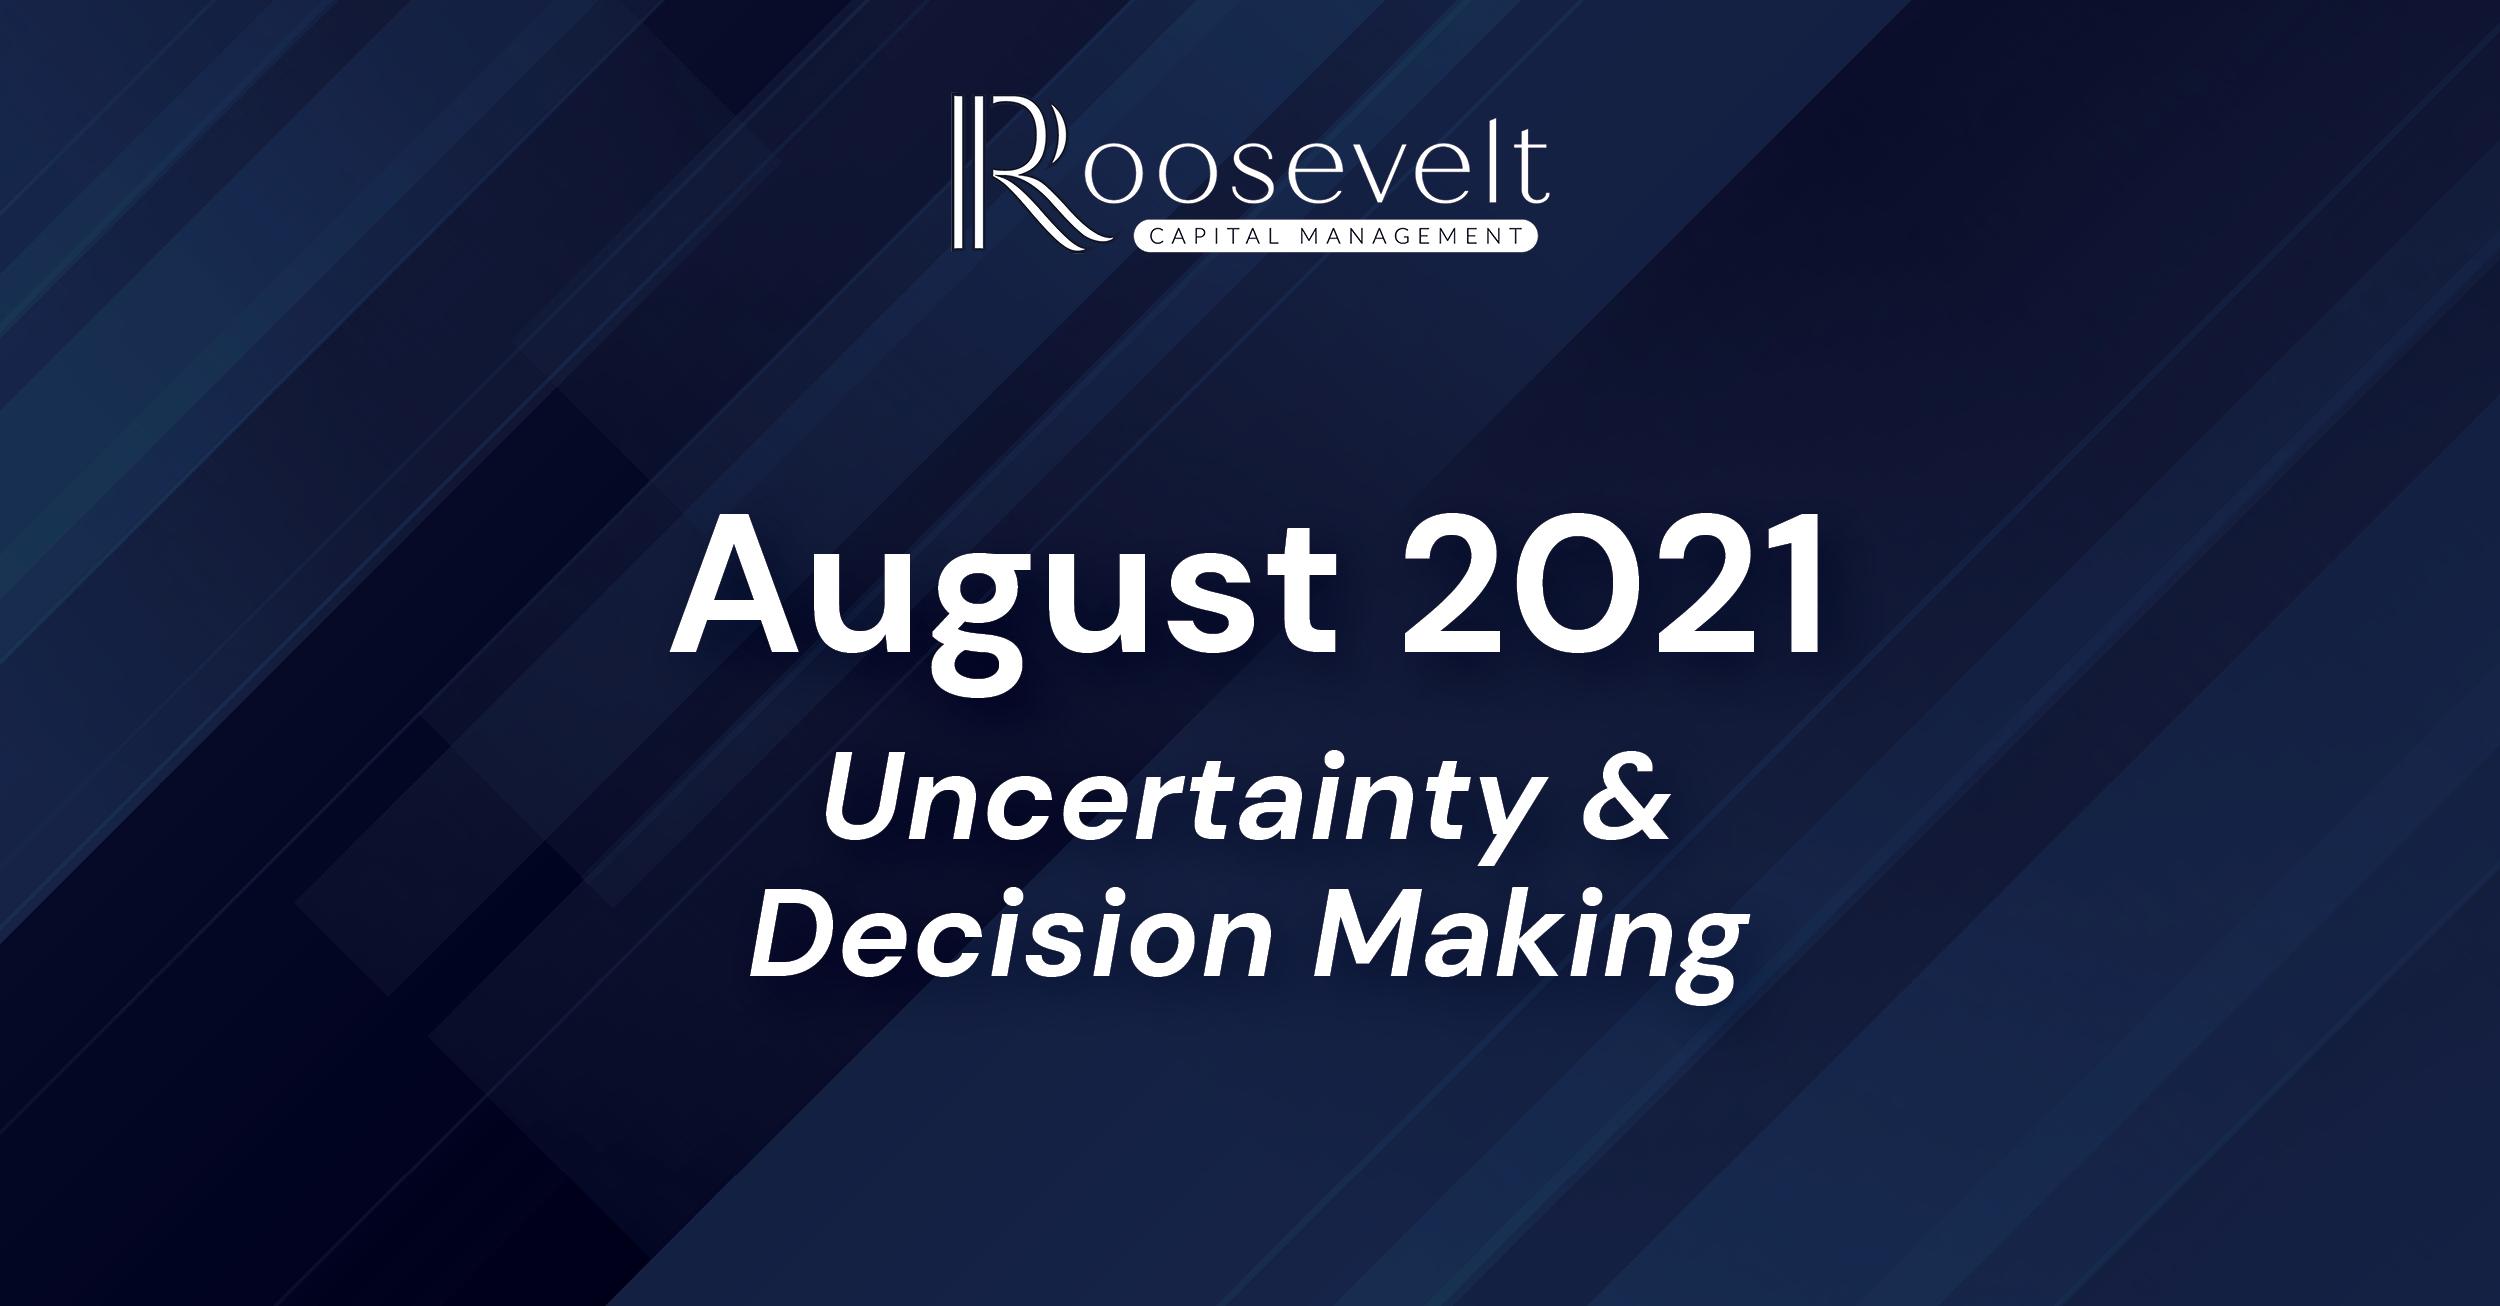 August 2021 - Uncertainty & Decision Making